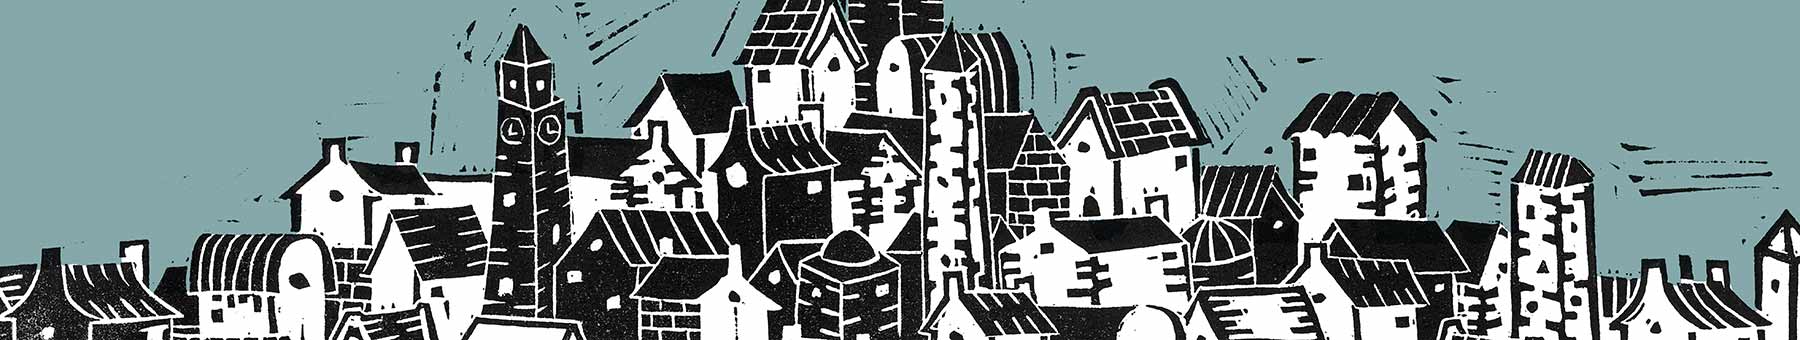 linocut of a city on a hill